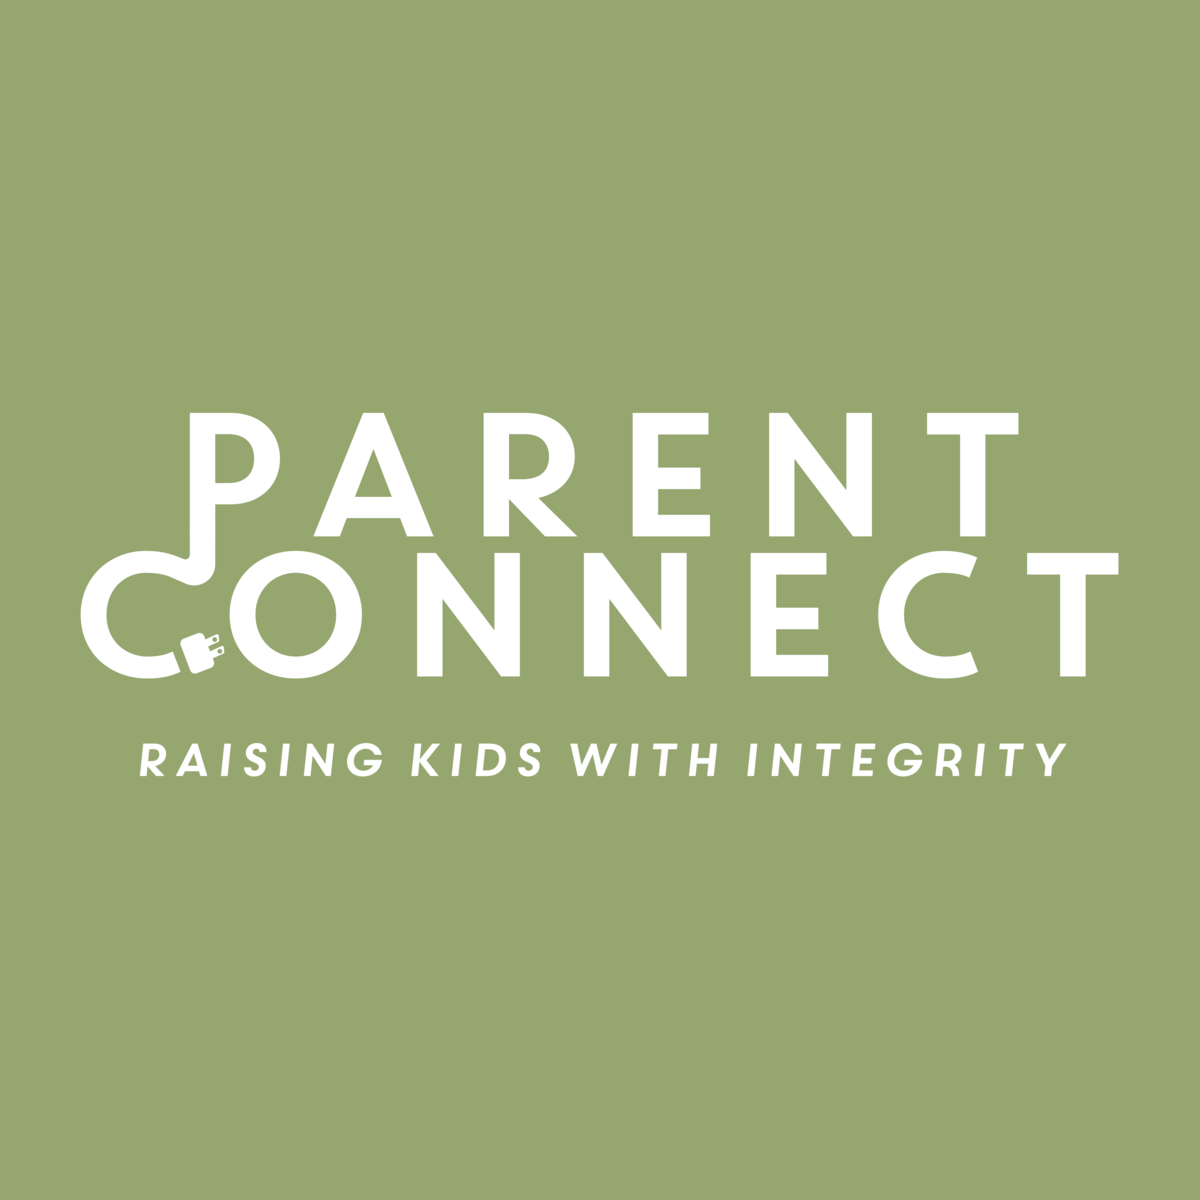 Raising Kids with Integrity